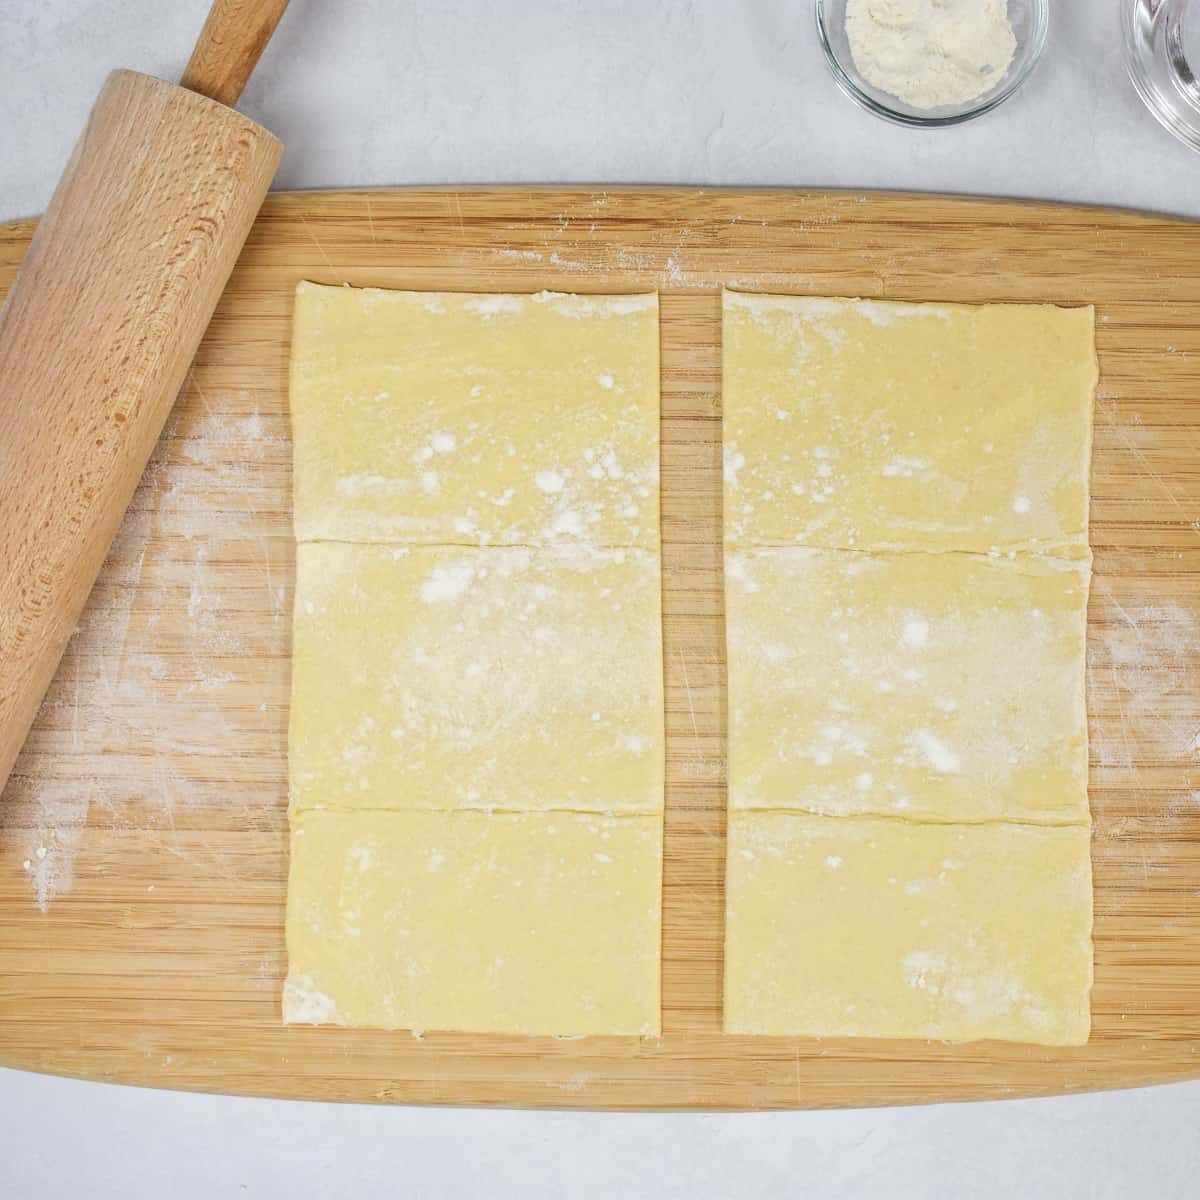 A puff pastry sheet cut in half on a wood cutting board with a rolling pin to the side.